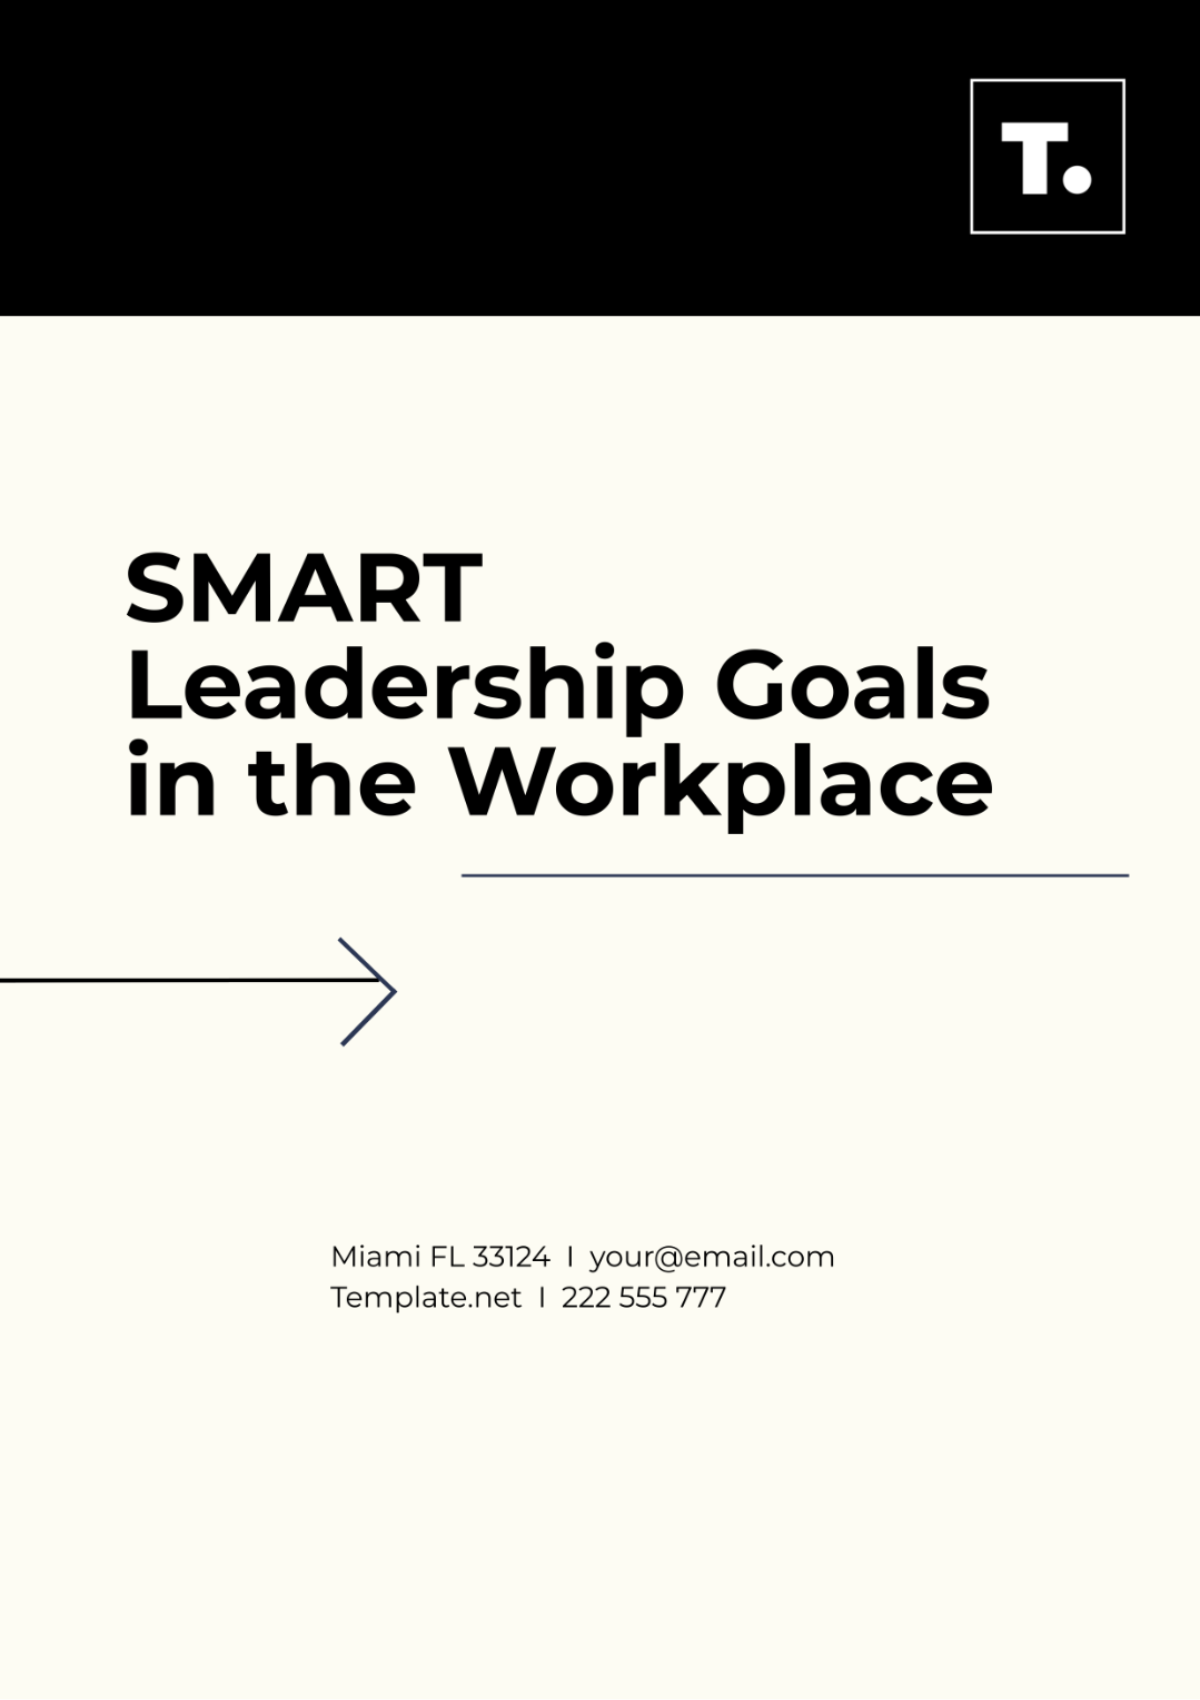 SMART Leadership Goals in the Workplace Template